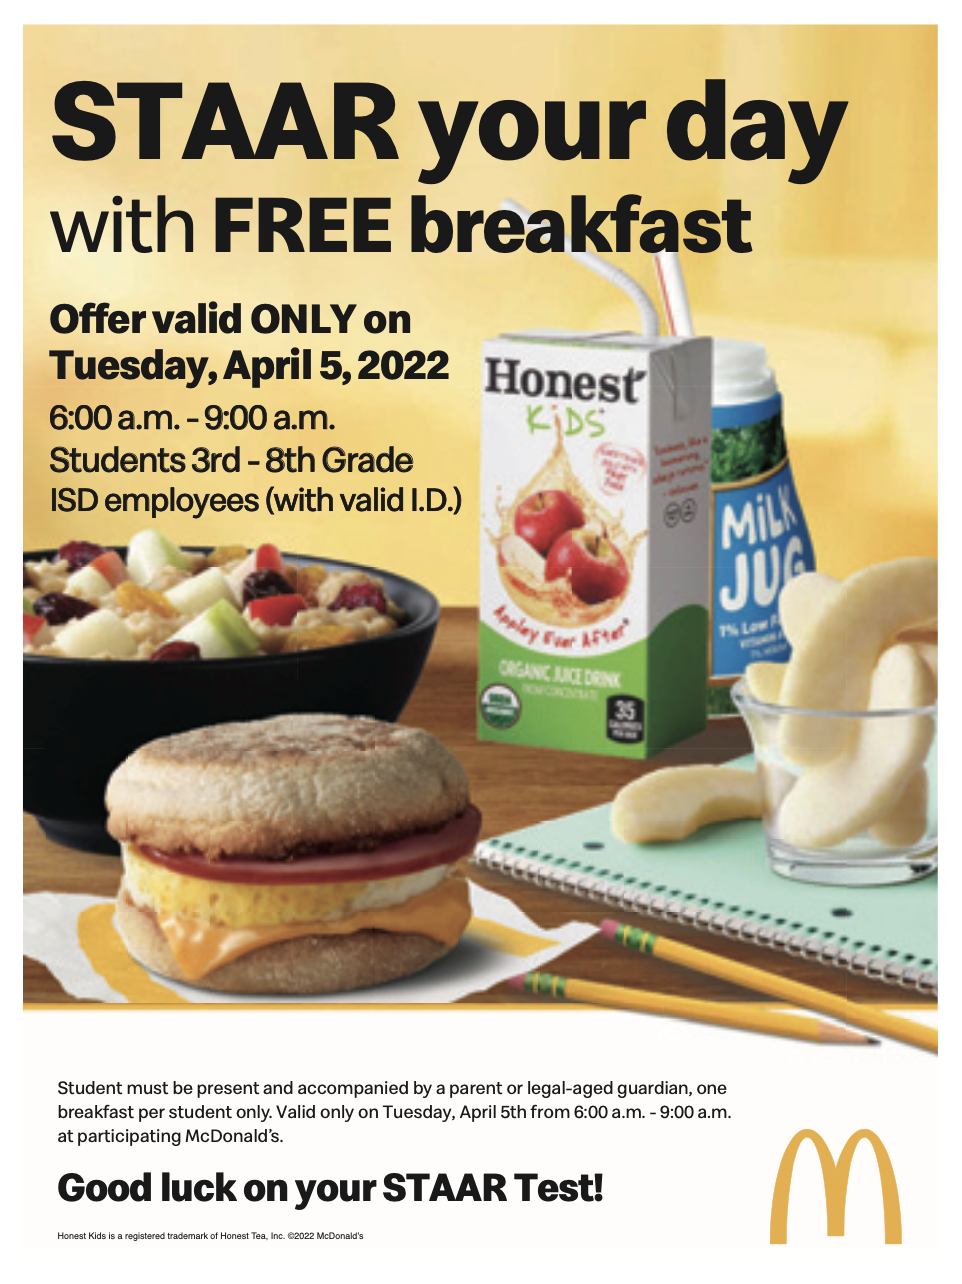 Advertisement for McDonalds Free Breakfast on April 5 for STAAR test takers